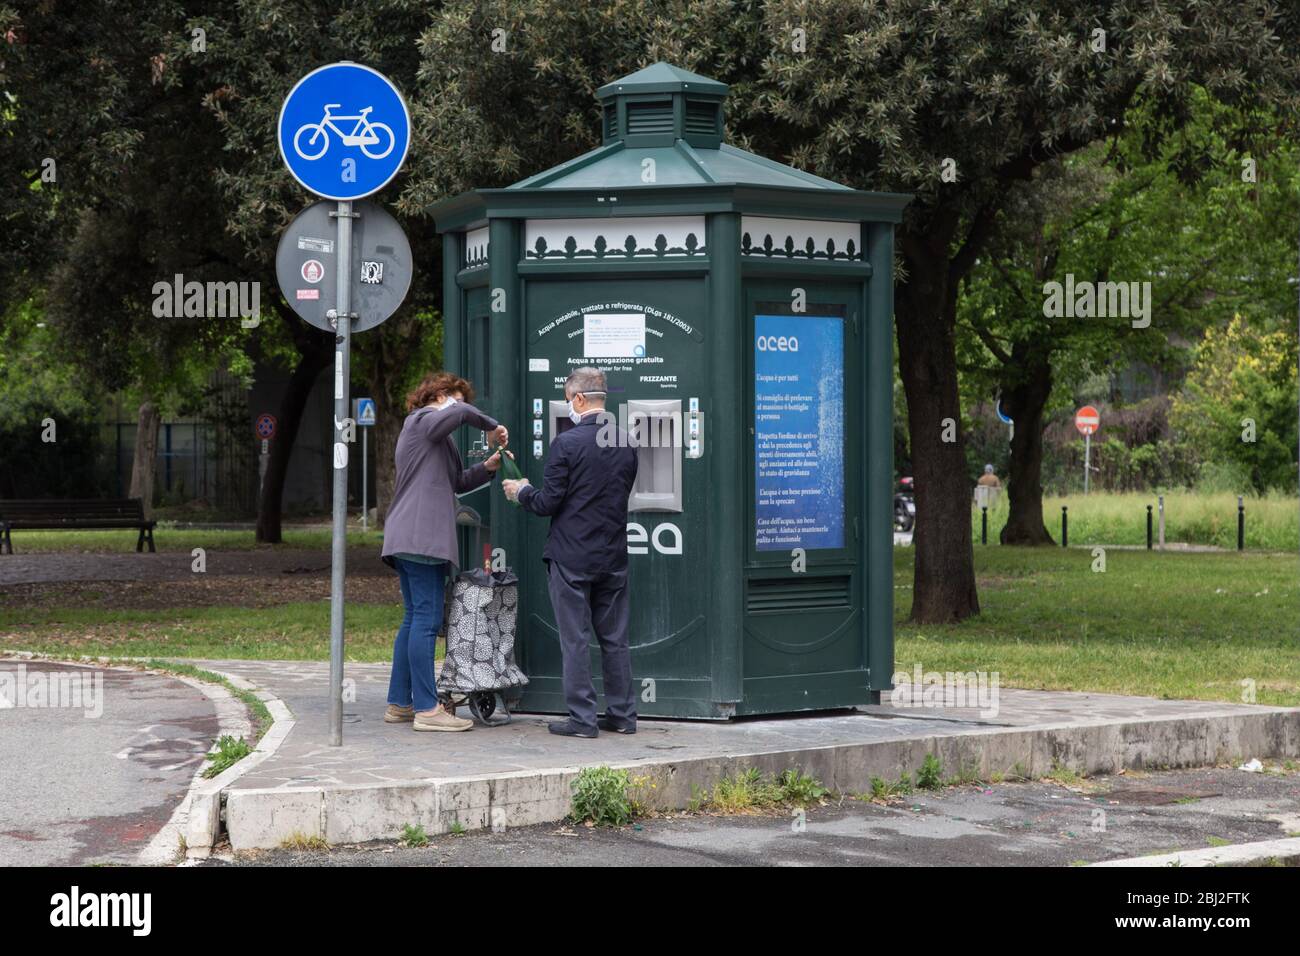 Roma, Italy. 28th Apr, 2020. Some people stock up on drinking water at the vending machine near the entrance to the Auditorium (Photo by Matteo Nardone/Pacific Press) Credit: Pacific Press Agency/Alamy Live News Stock Photo